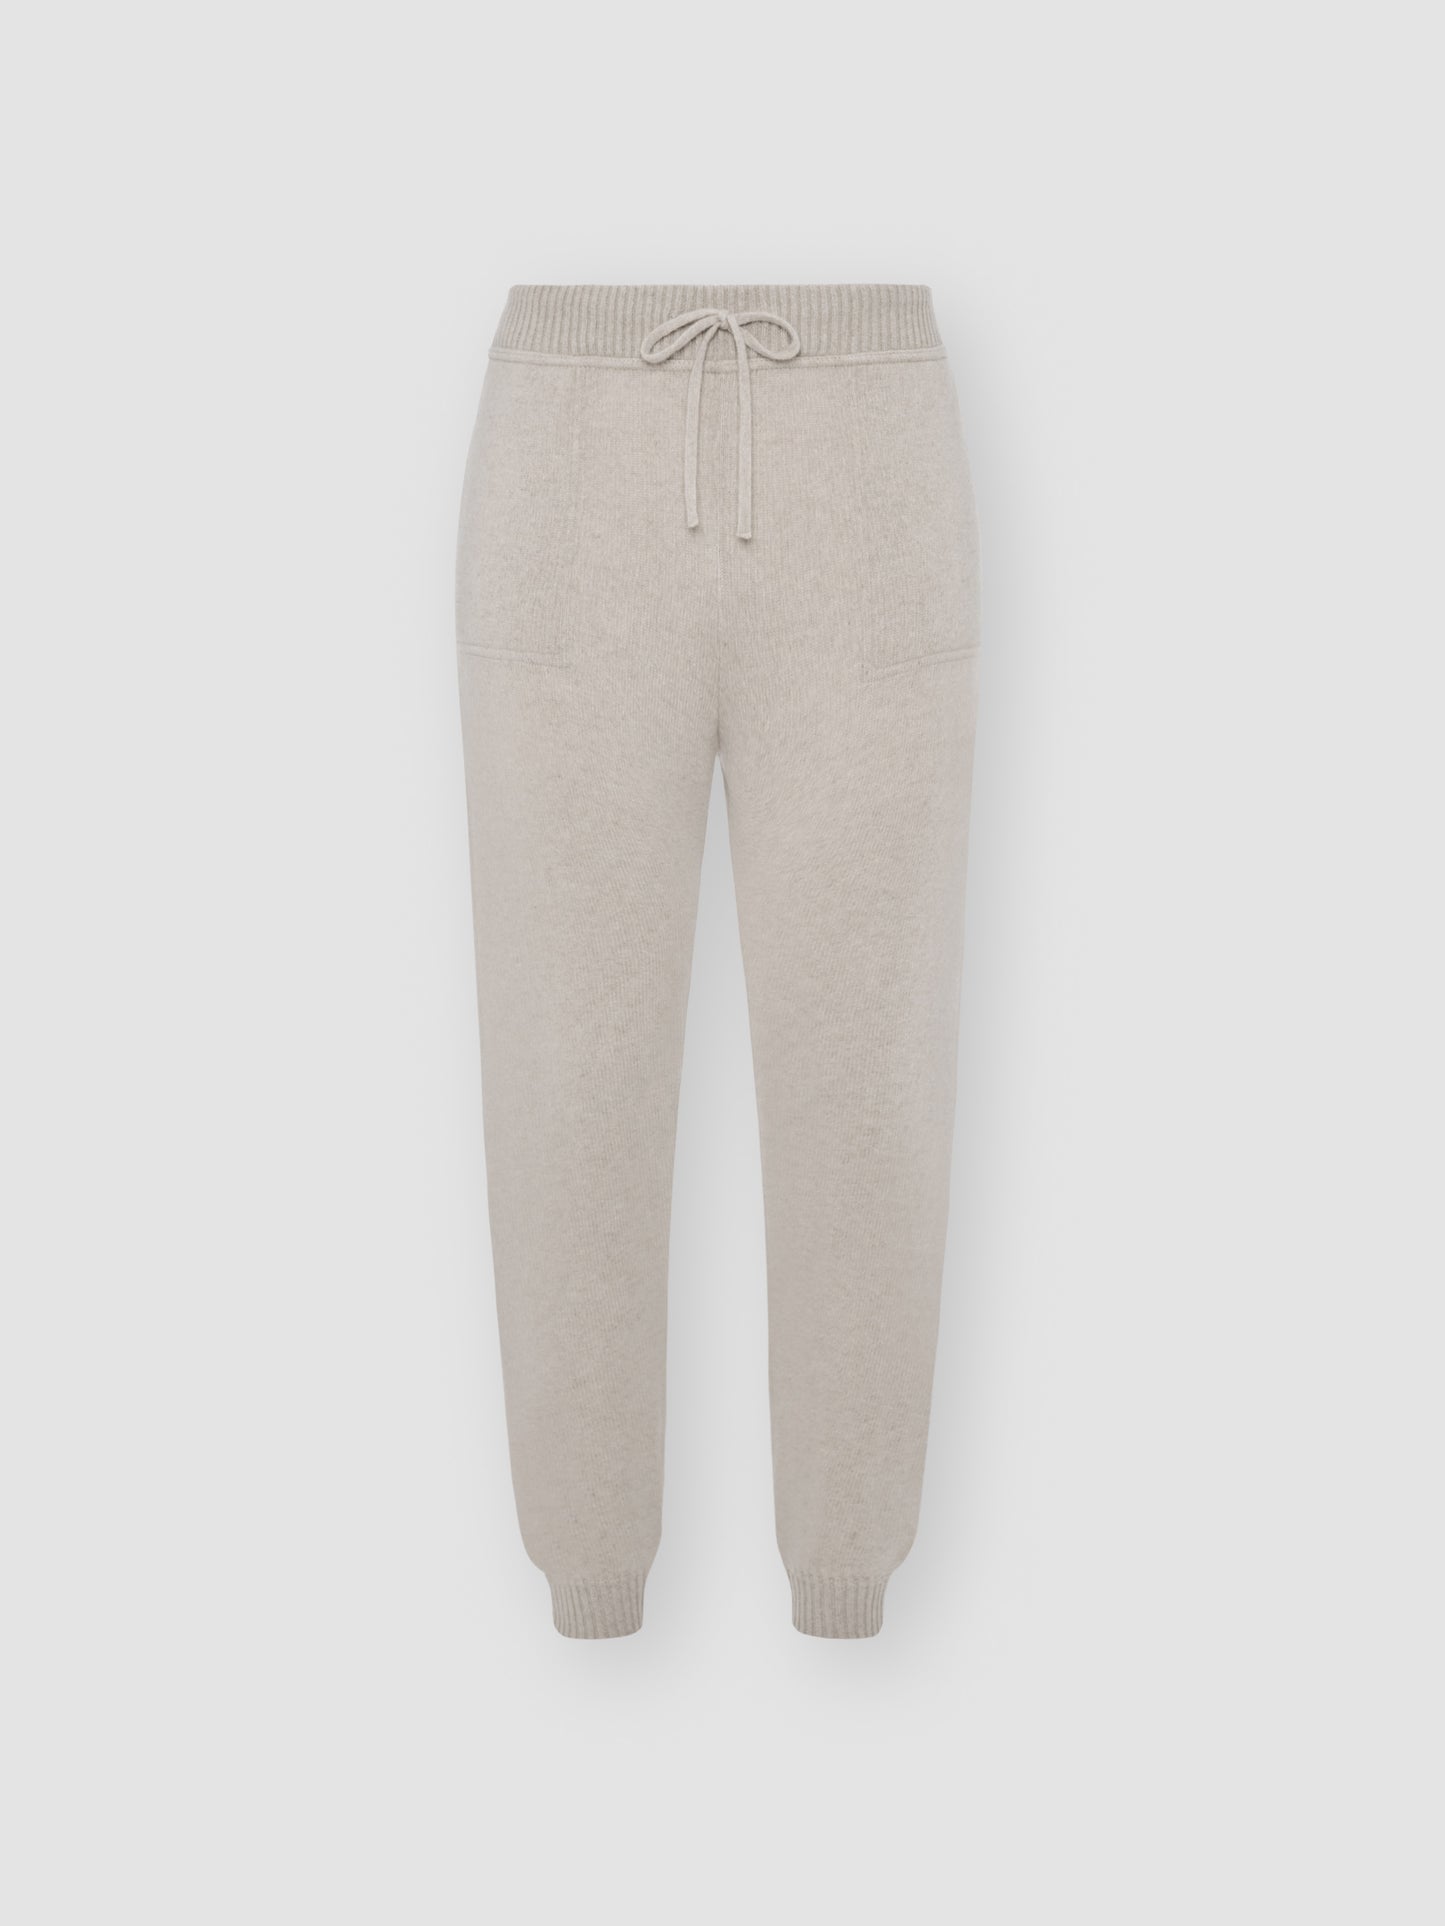 Cashmere Track Pant Beige Product Image